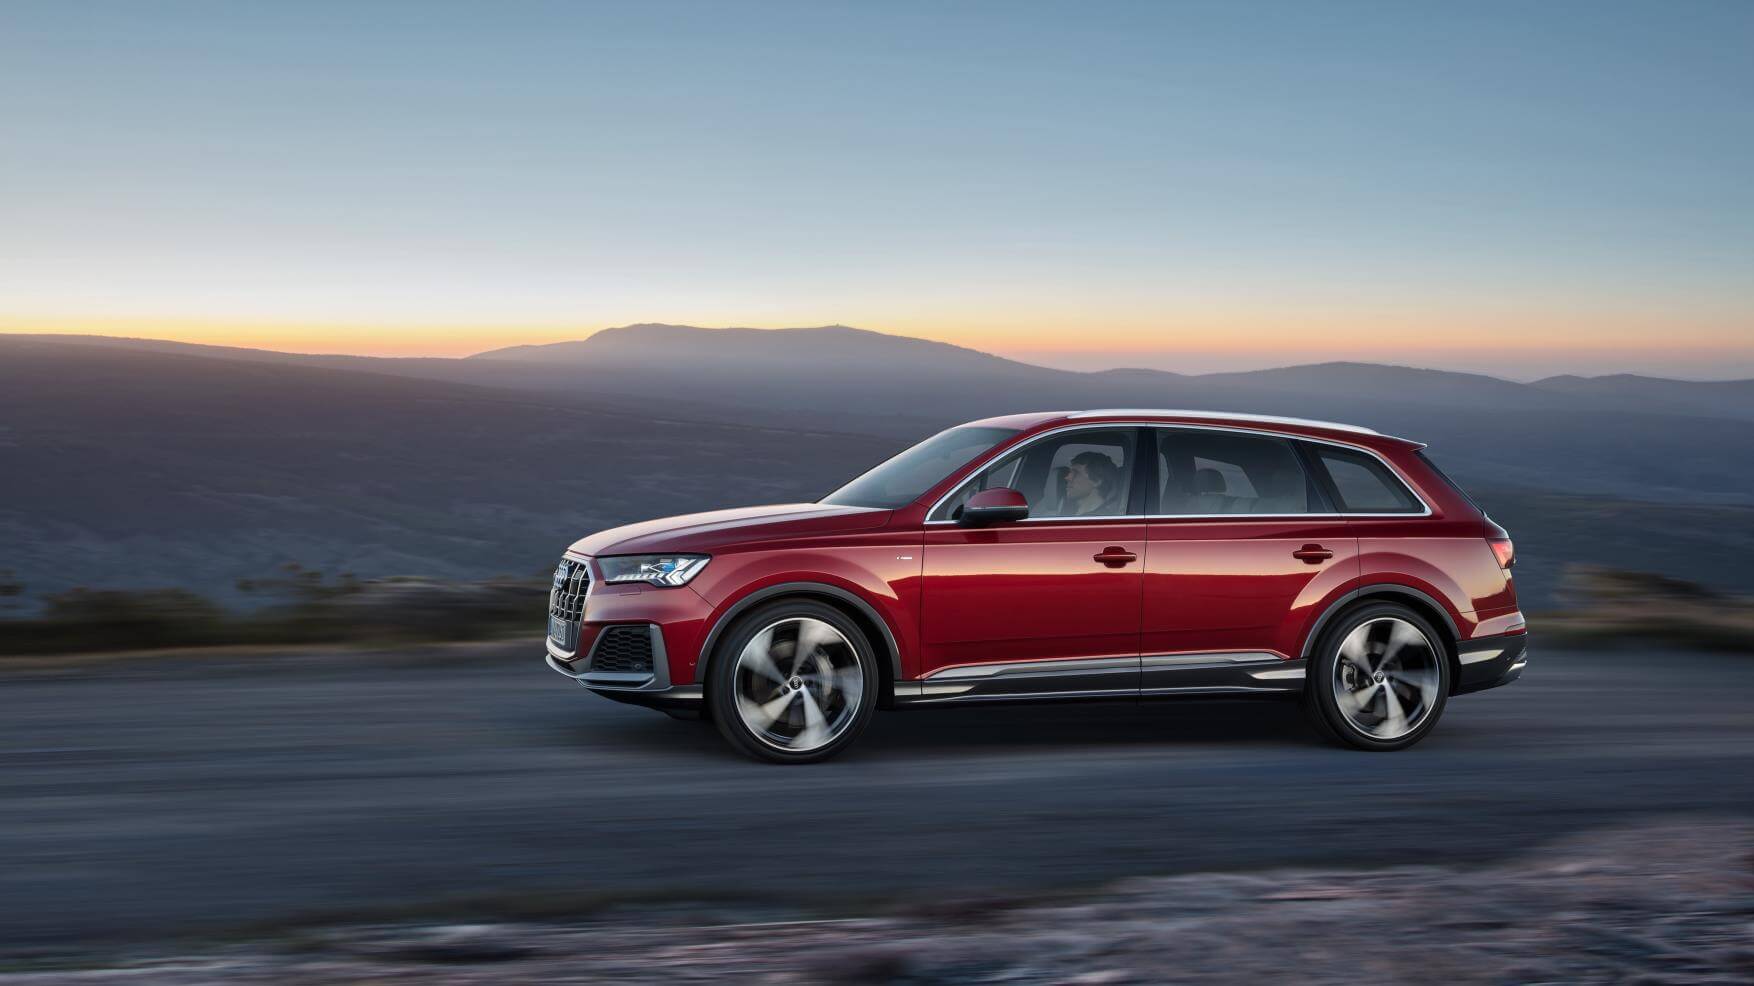 Audi Q7 2019: lateral